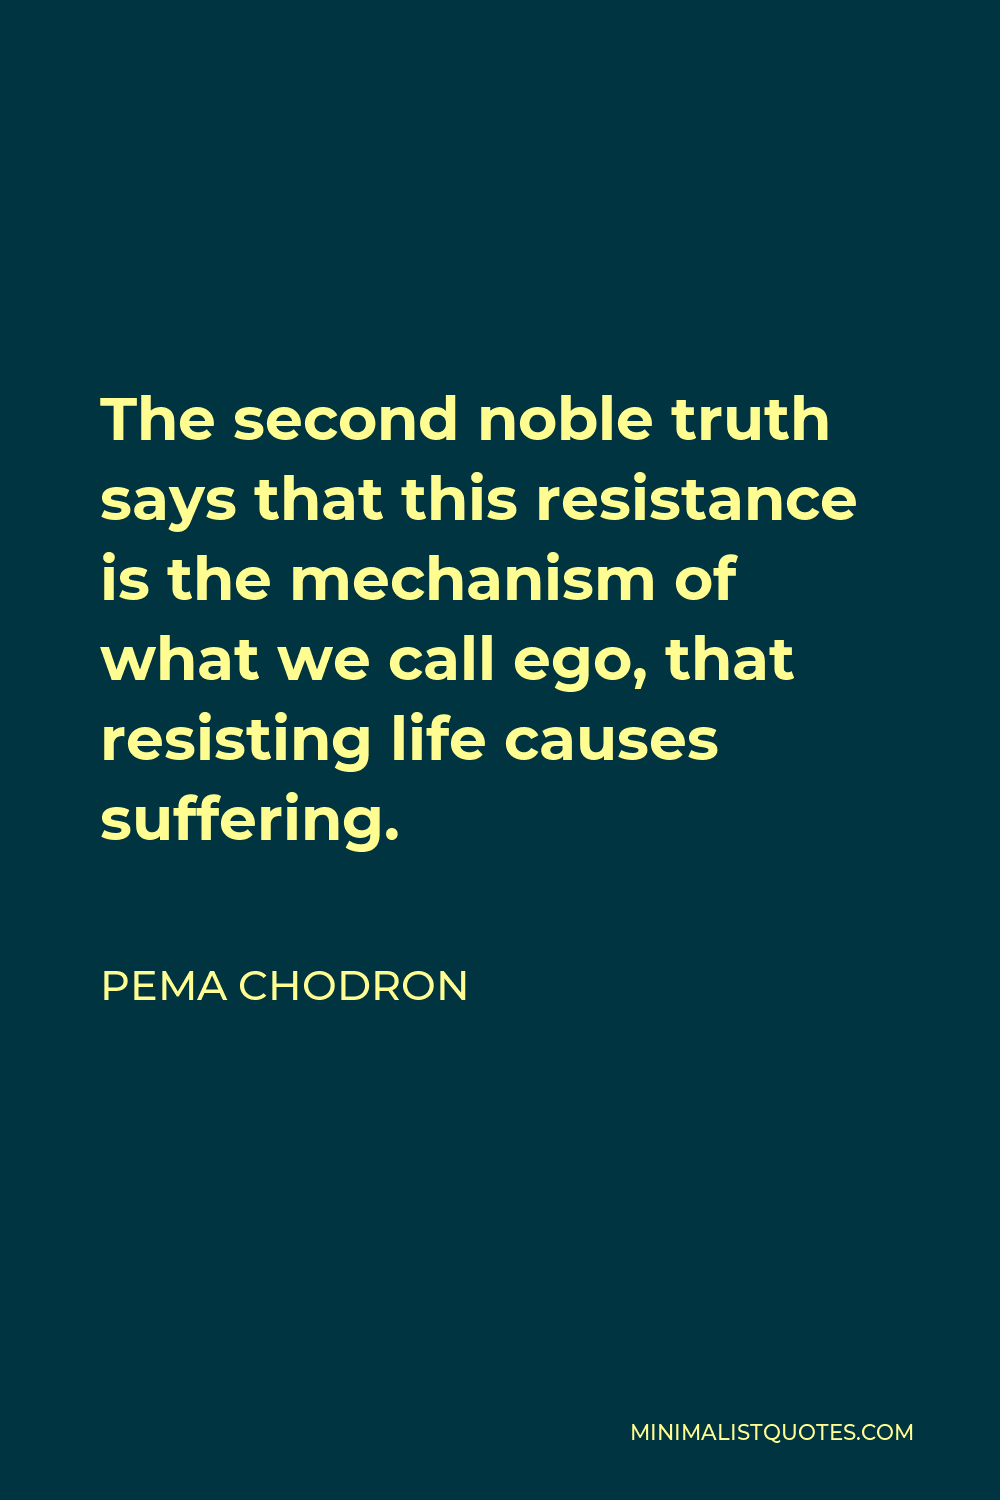 Pema Chodron Quote - The second noble truth says that this resistance is the mechanism of what we call ego, that resisting life causes suffering.